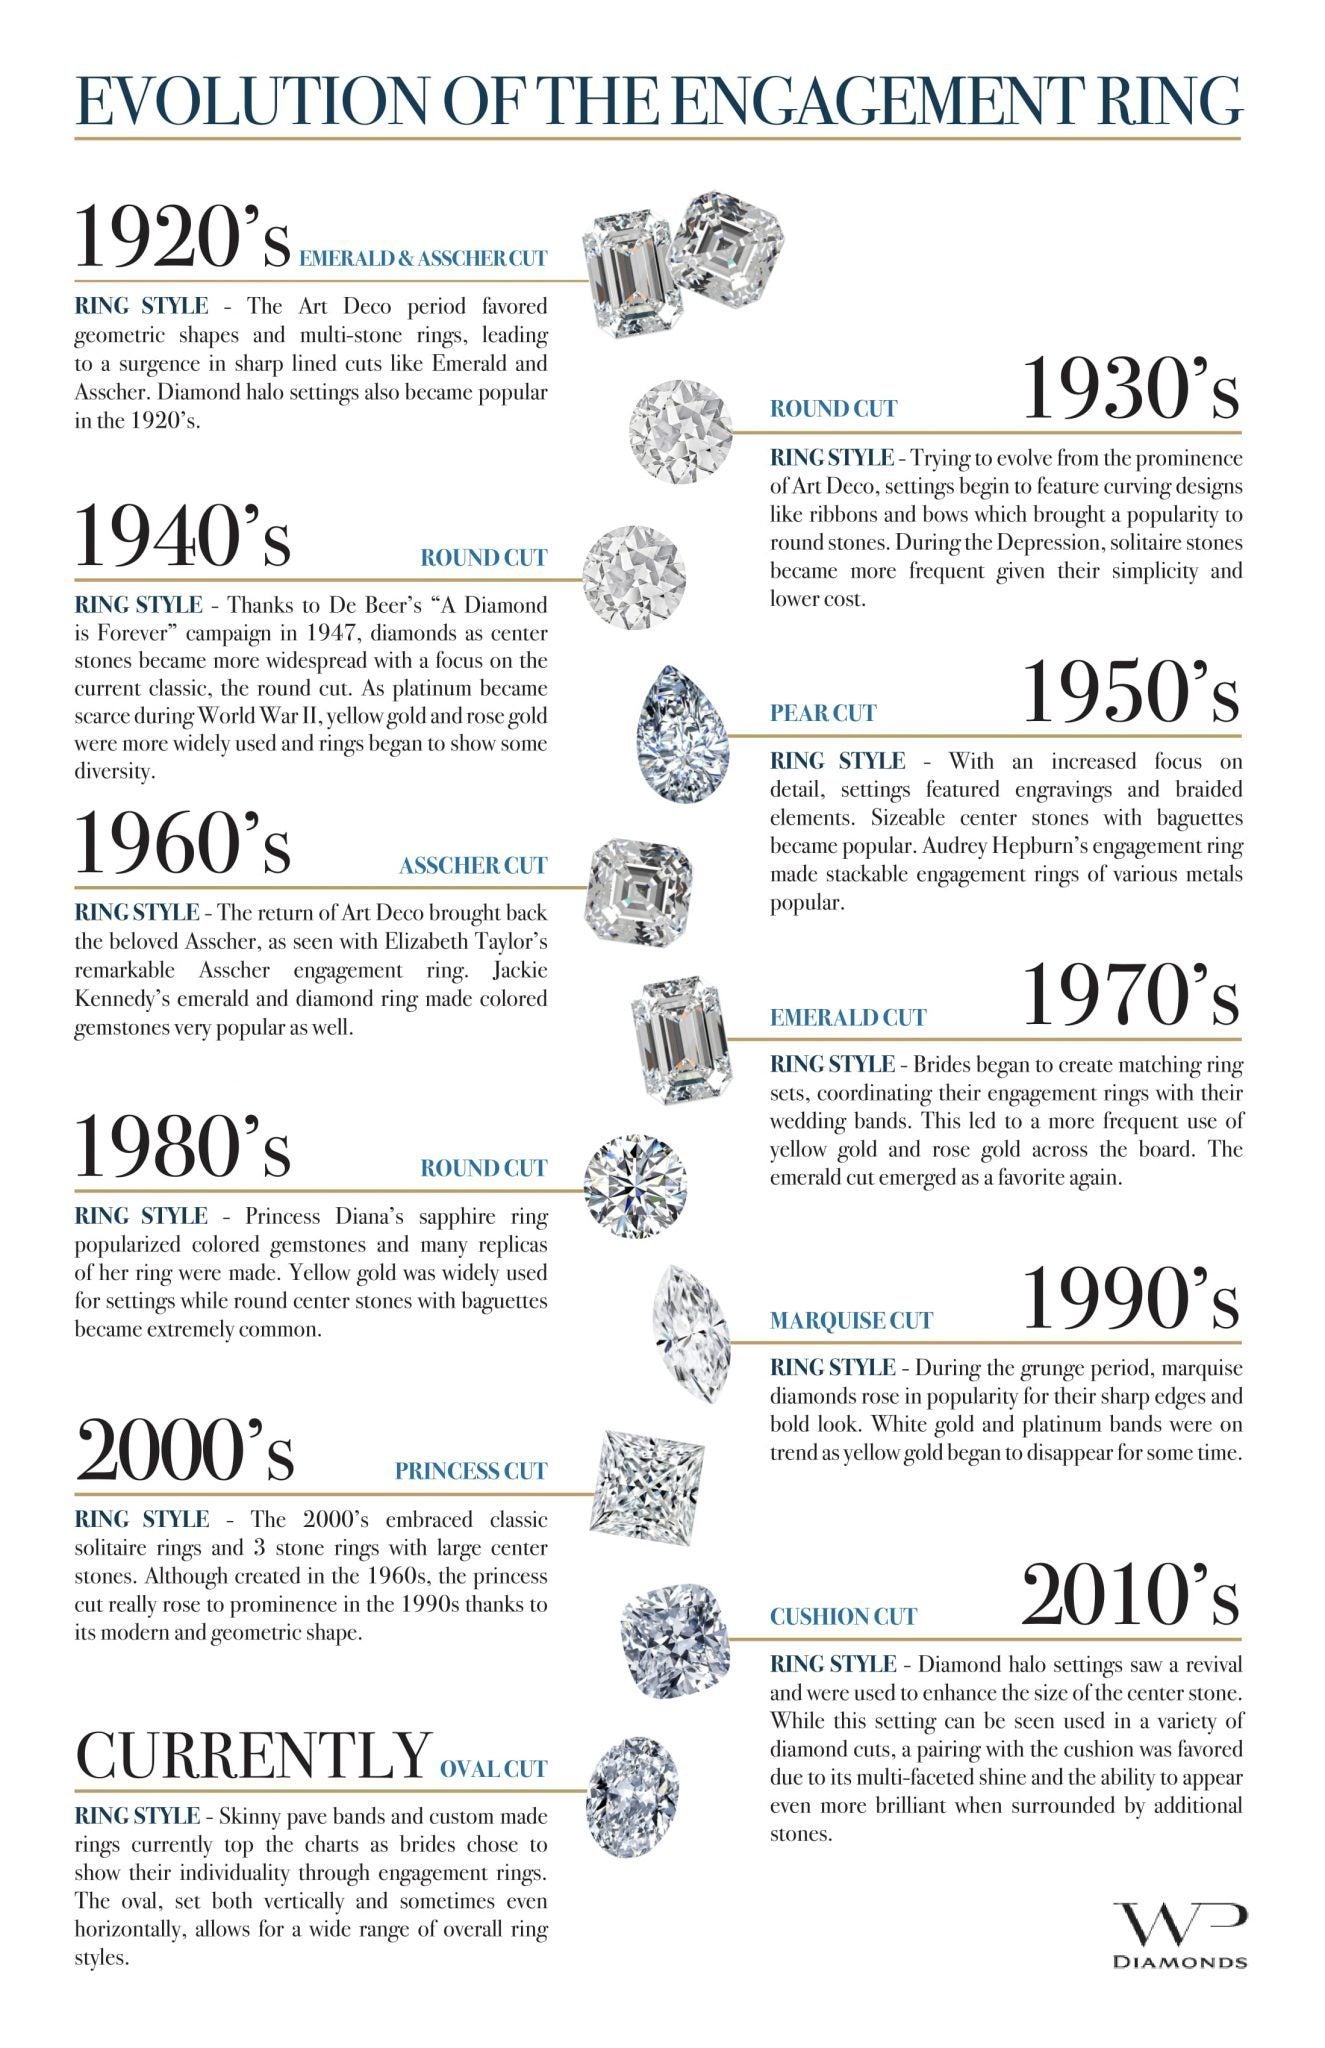 Evolution of the Engagement Ring